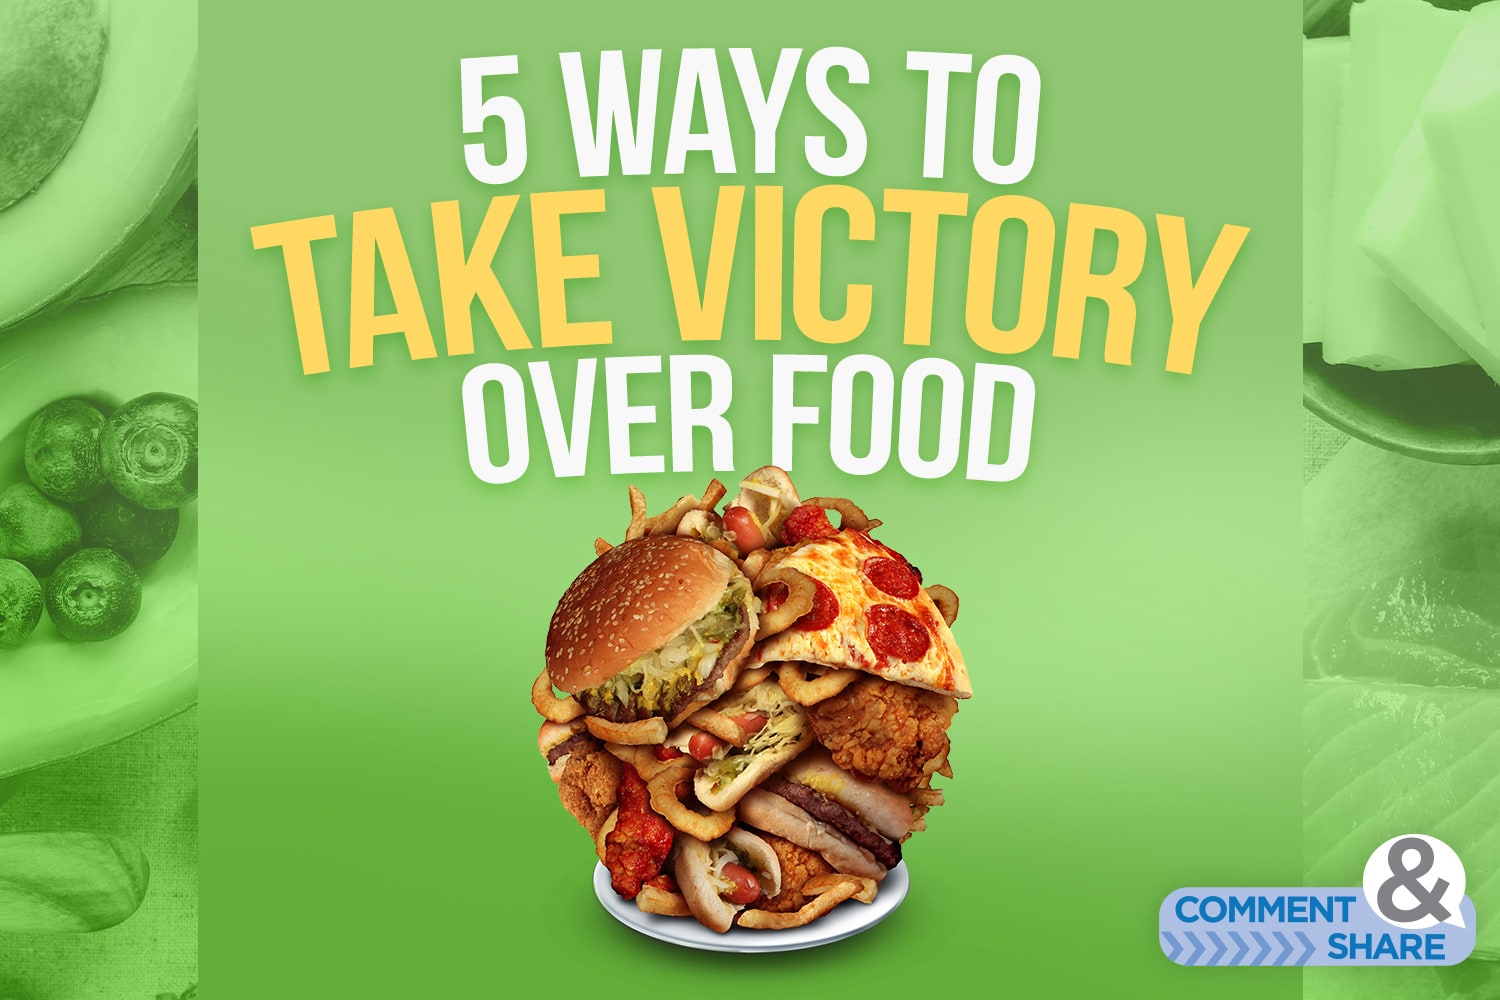 5 Ways to Take Victory Over Food